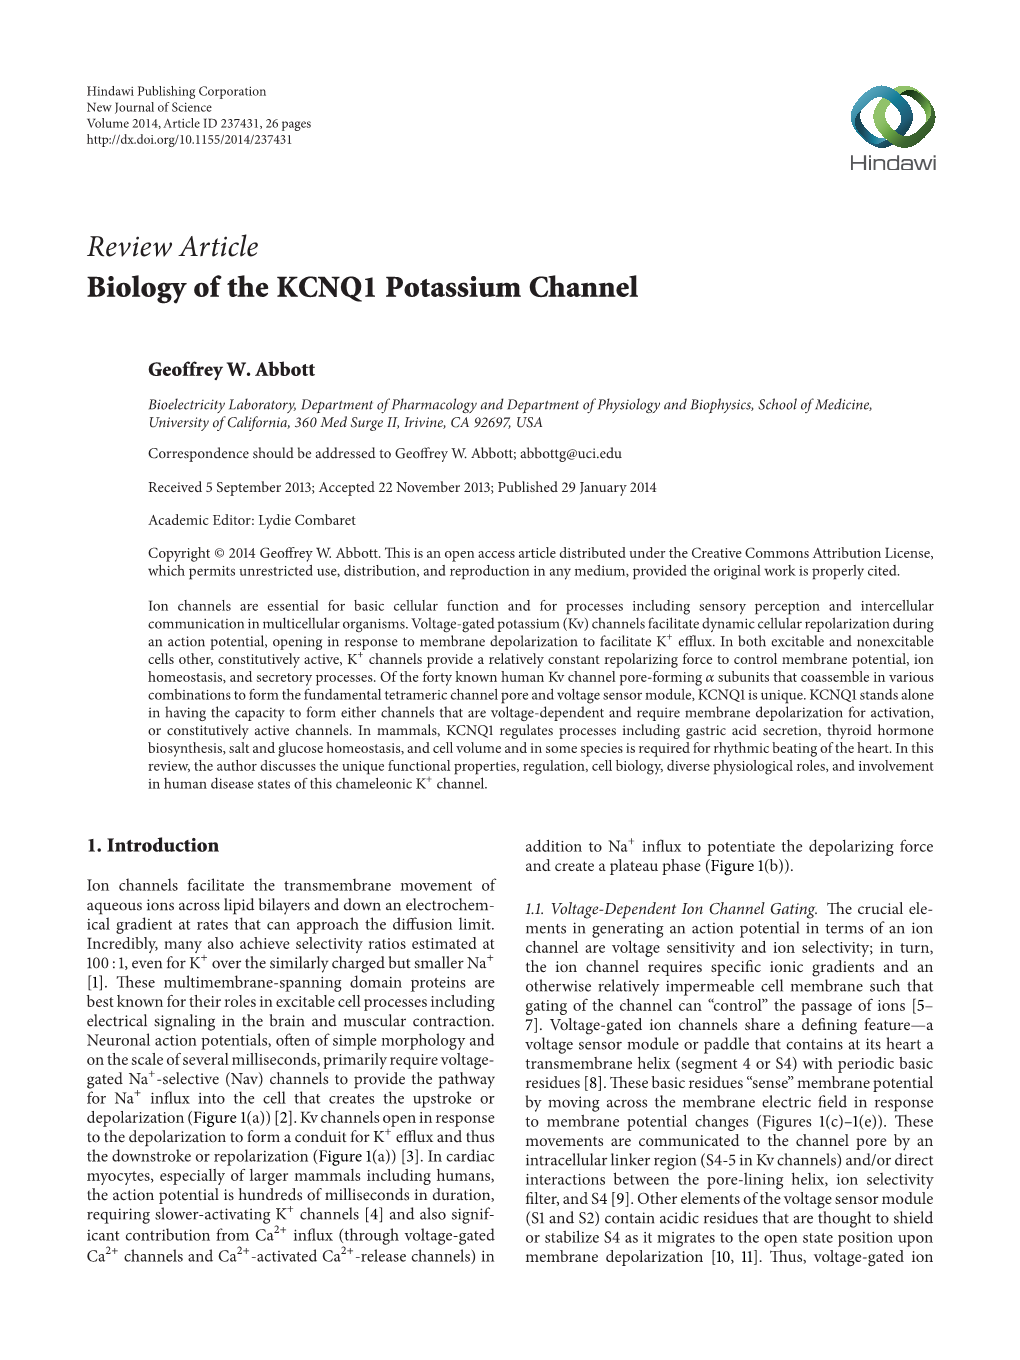 Review Article Biology of the KCNQ1 Potassium Channel